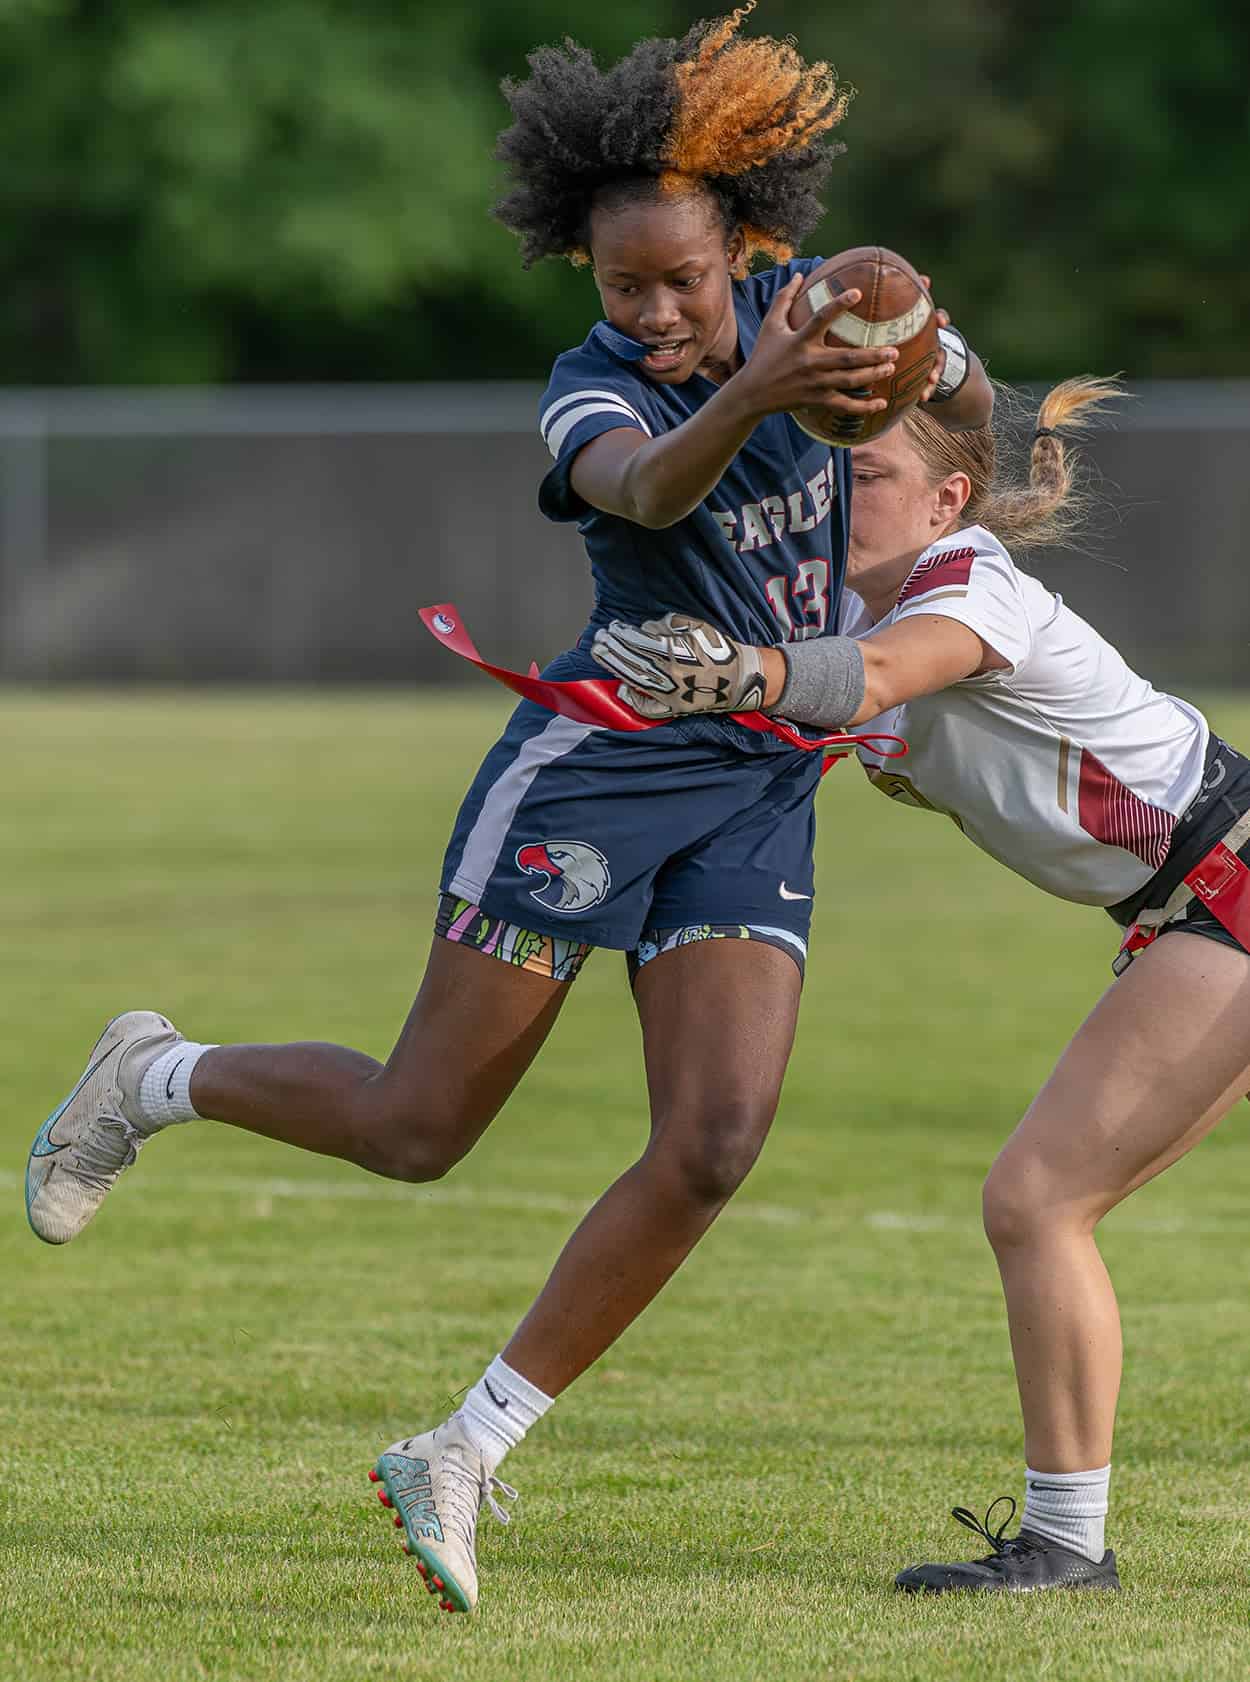 Springstead High, 13, J’Ziyah Munford tries to avoid having her flag pulled by a Countryside defender during the Eagles 36-0 win at home in the 2A District 14 playoff match. Photo by [Joseph Dicristofalo]